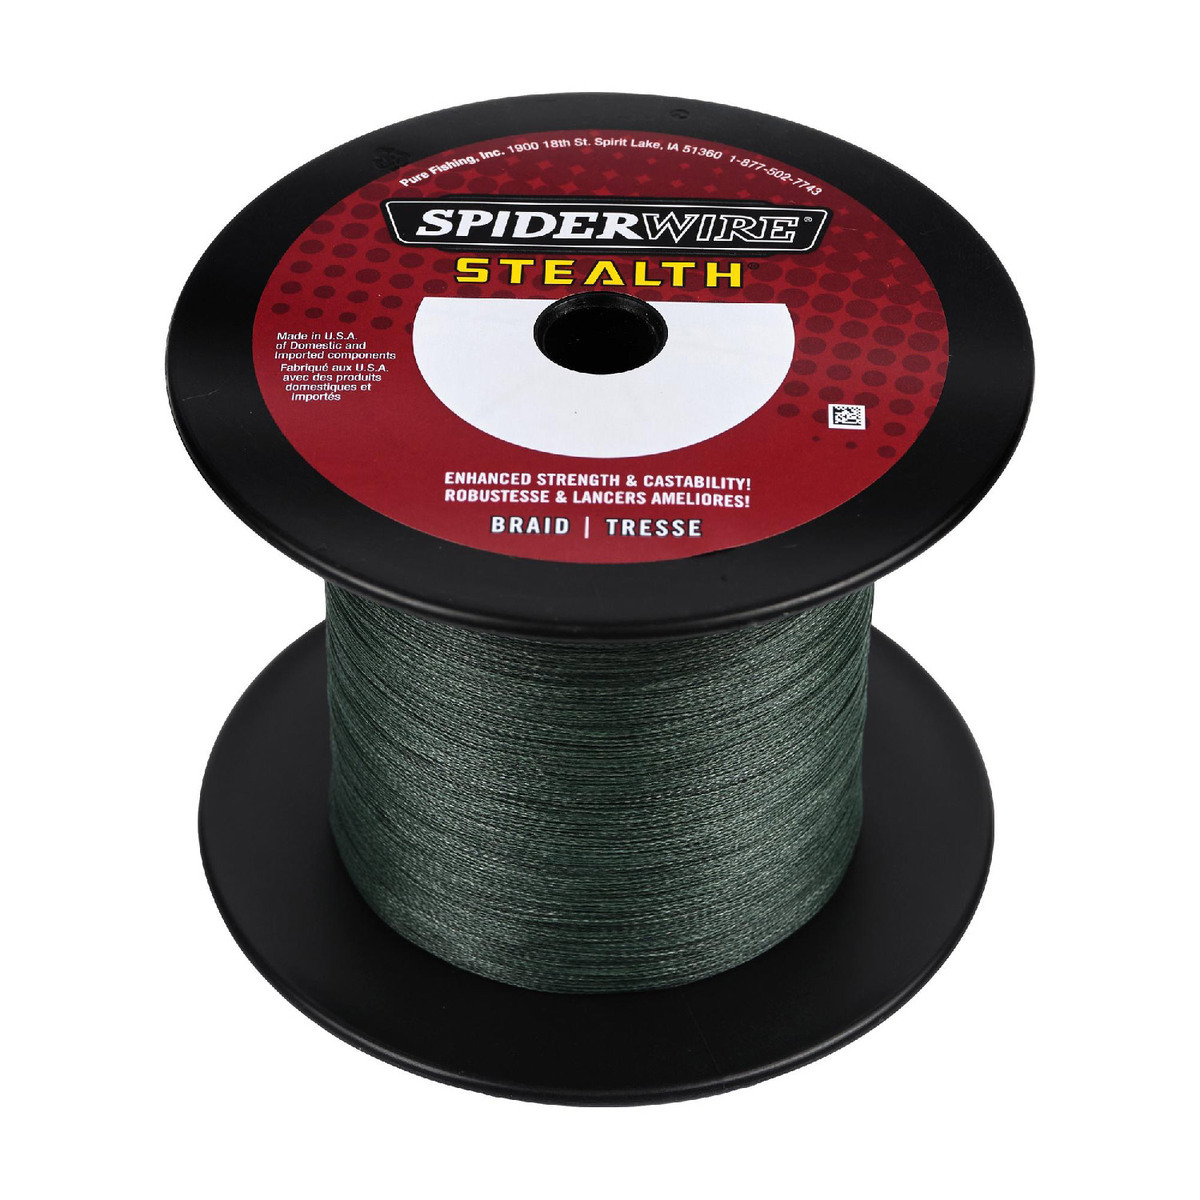 SpiderWire Stealth Braided Fishing Line - 40lb, Moss Green, 1500yds